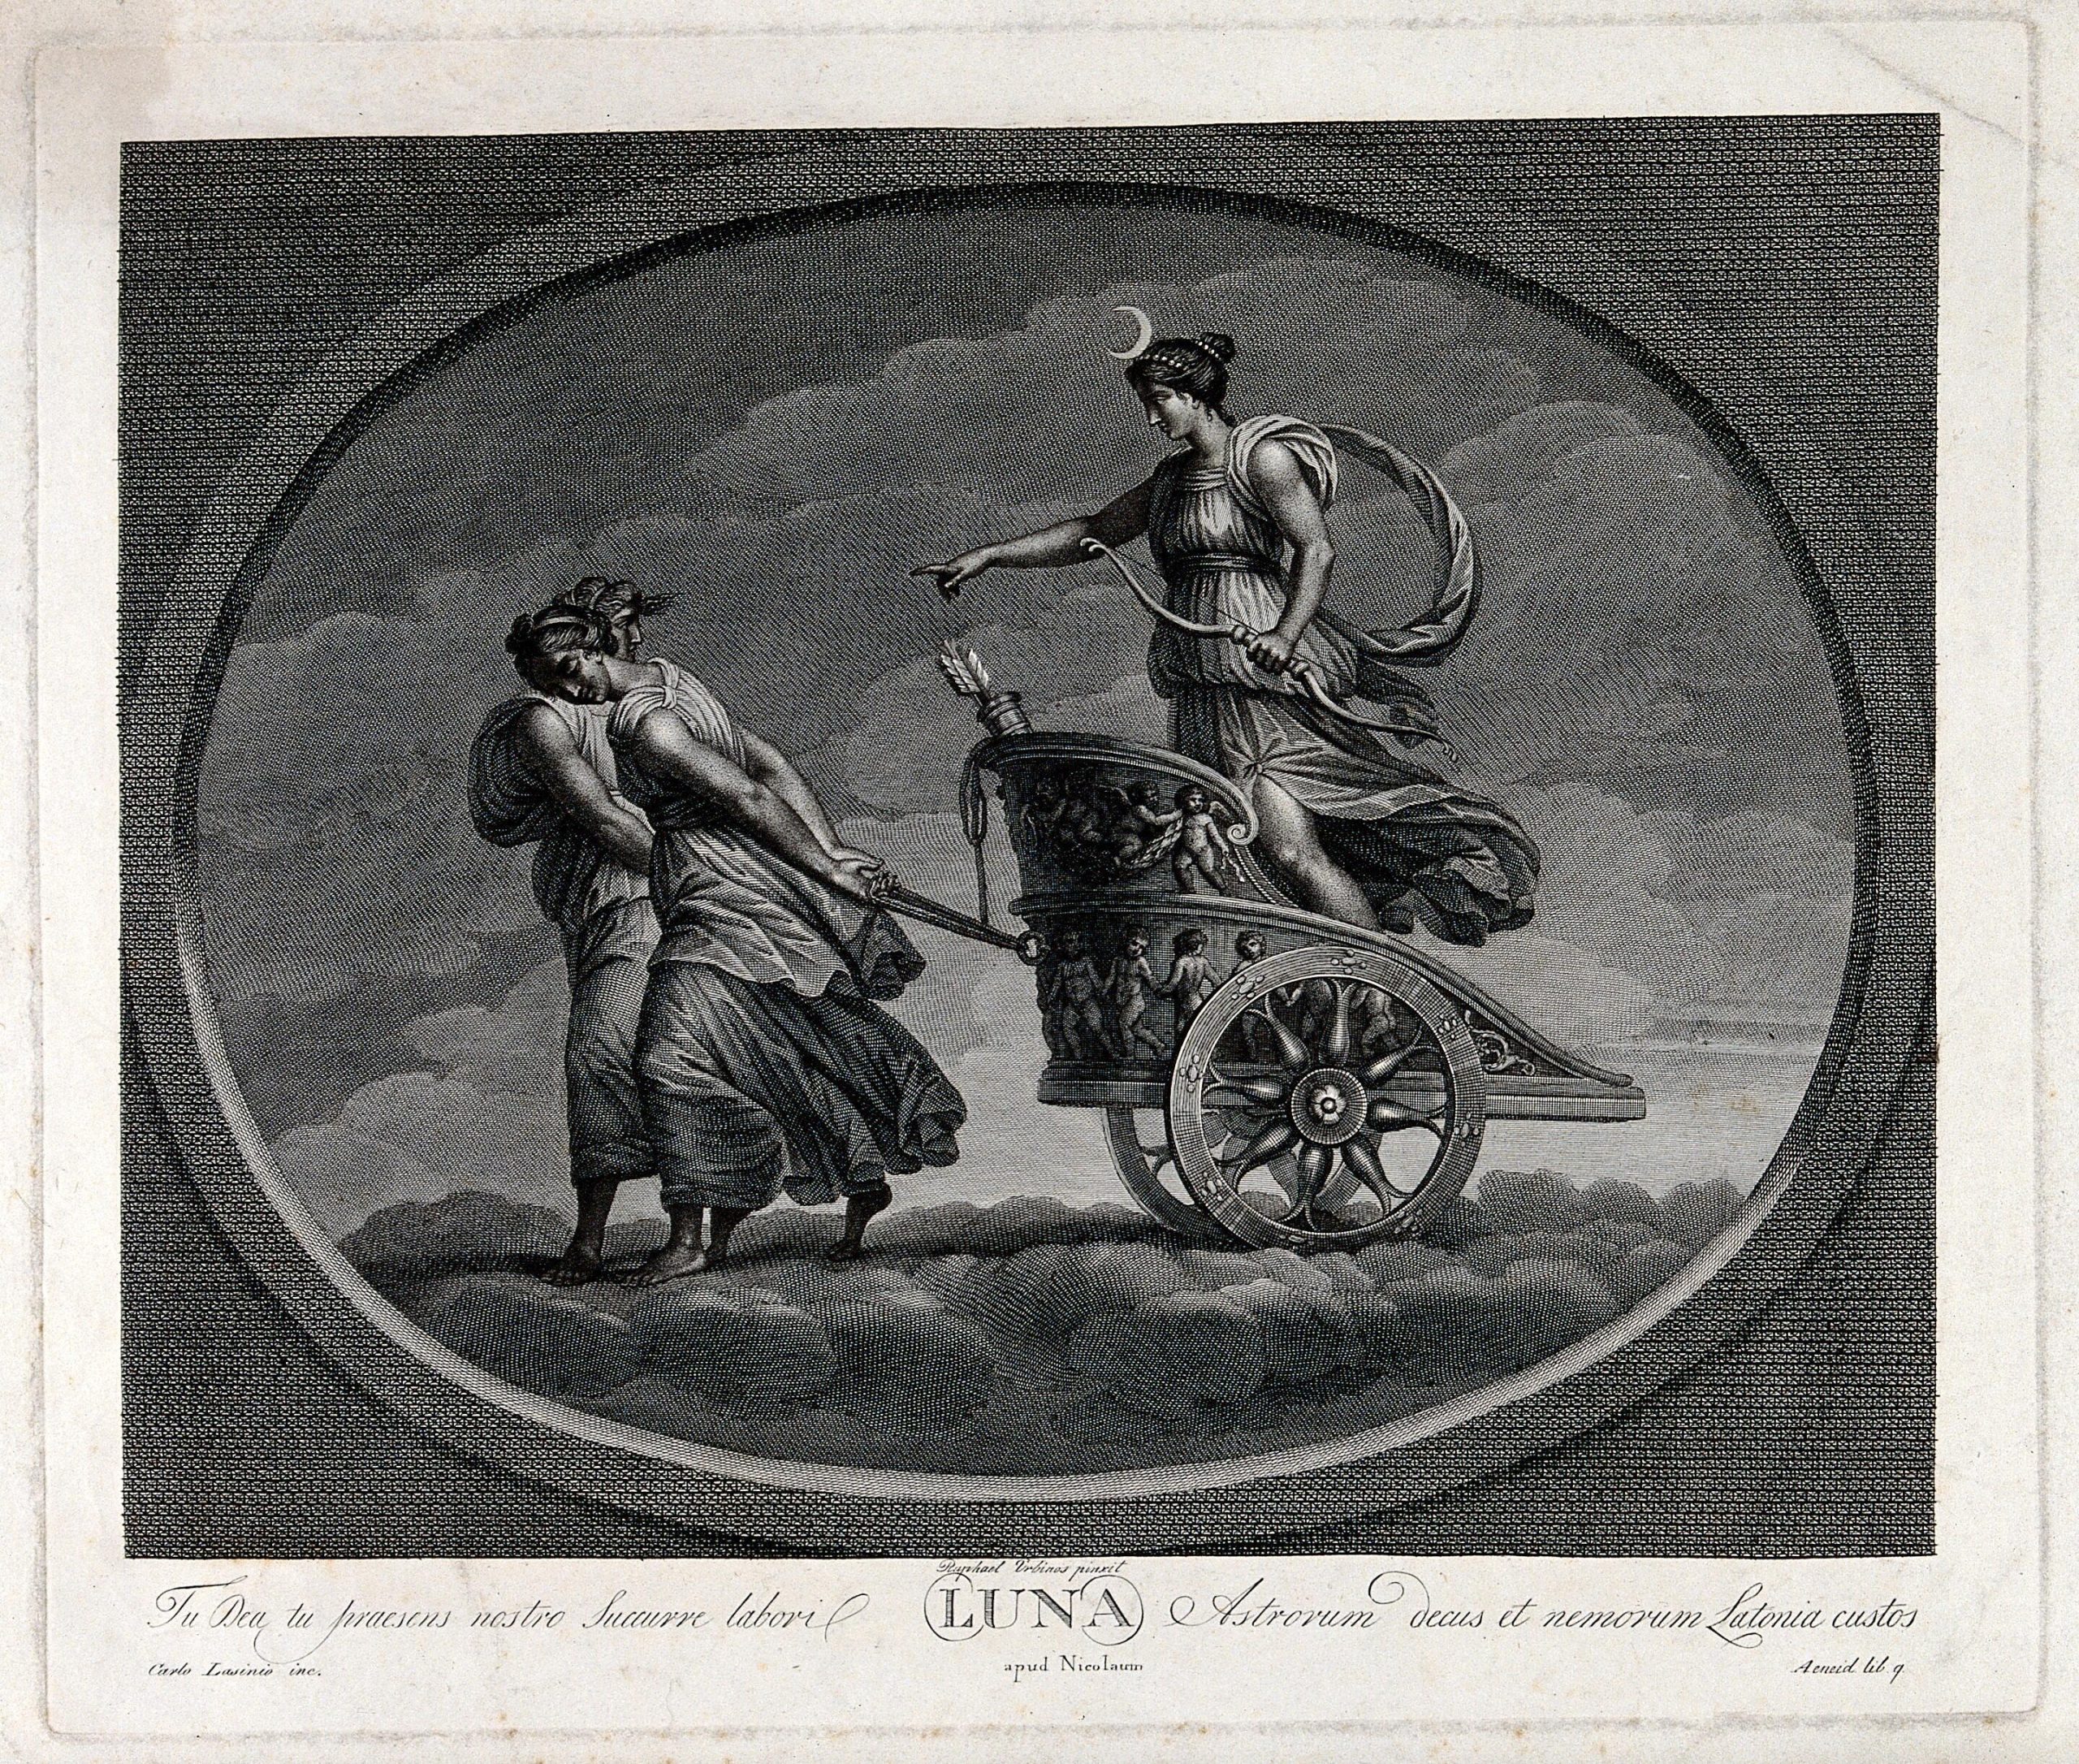 A steel engraving of a chariot and two women pulling the chariot.